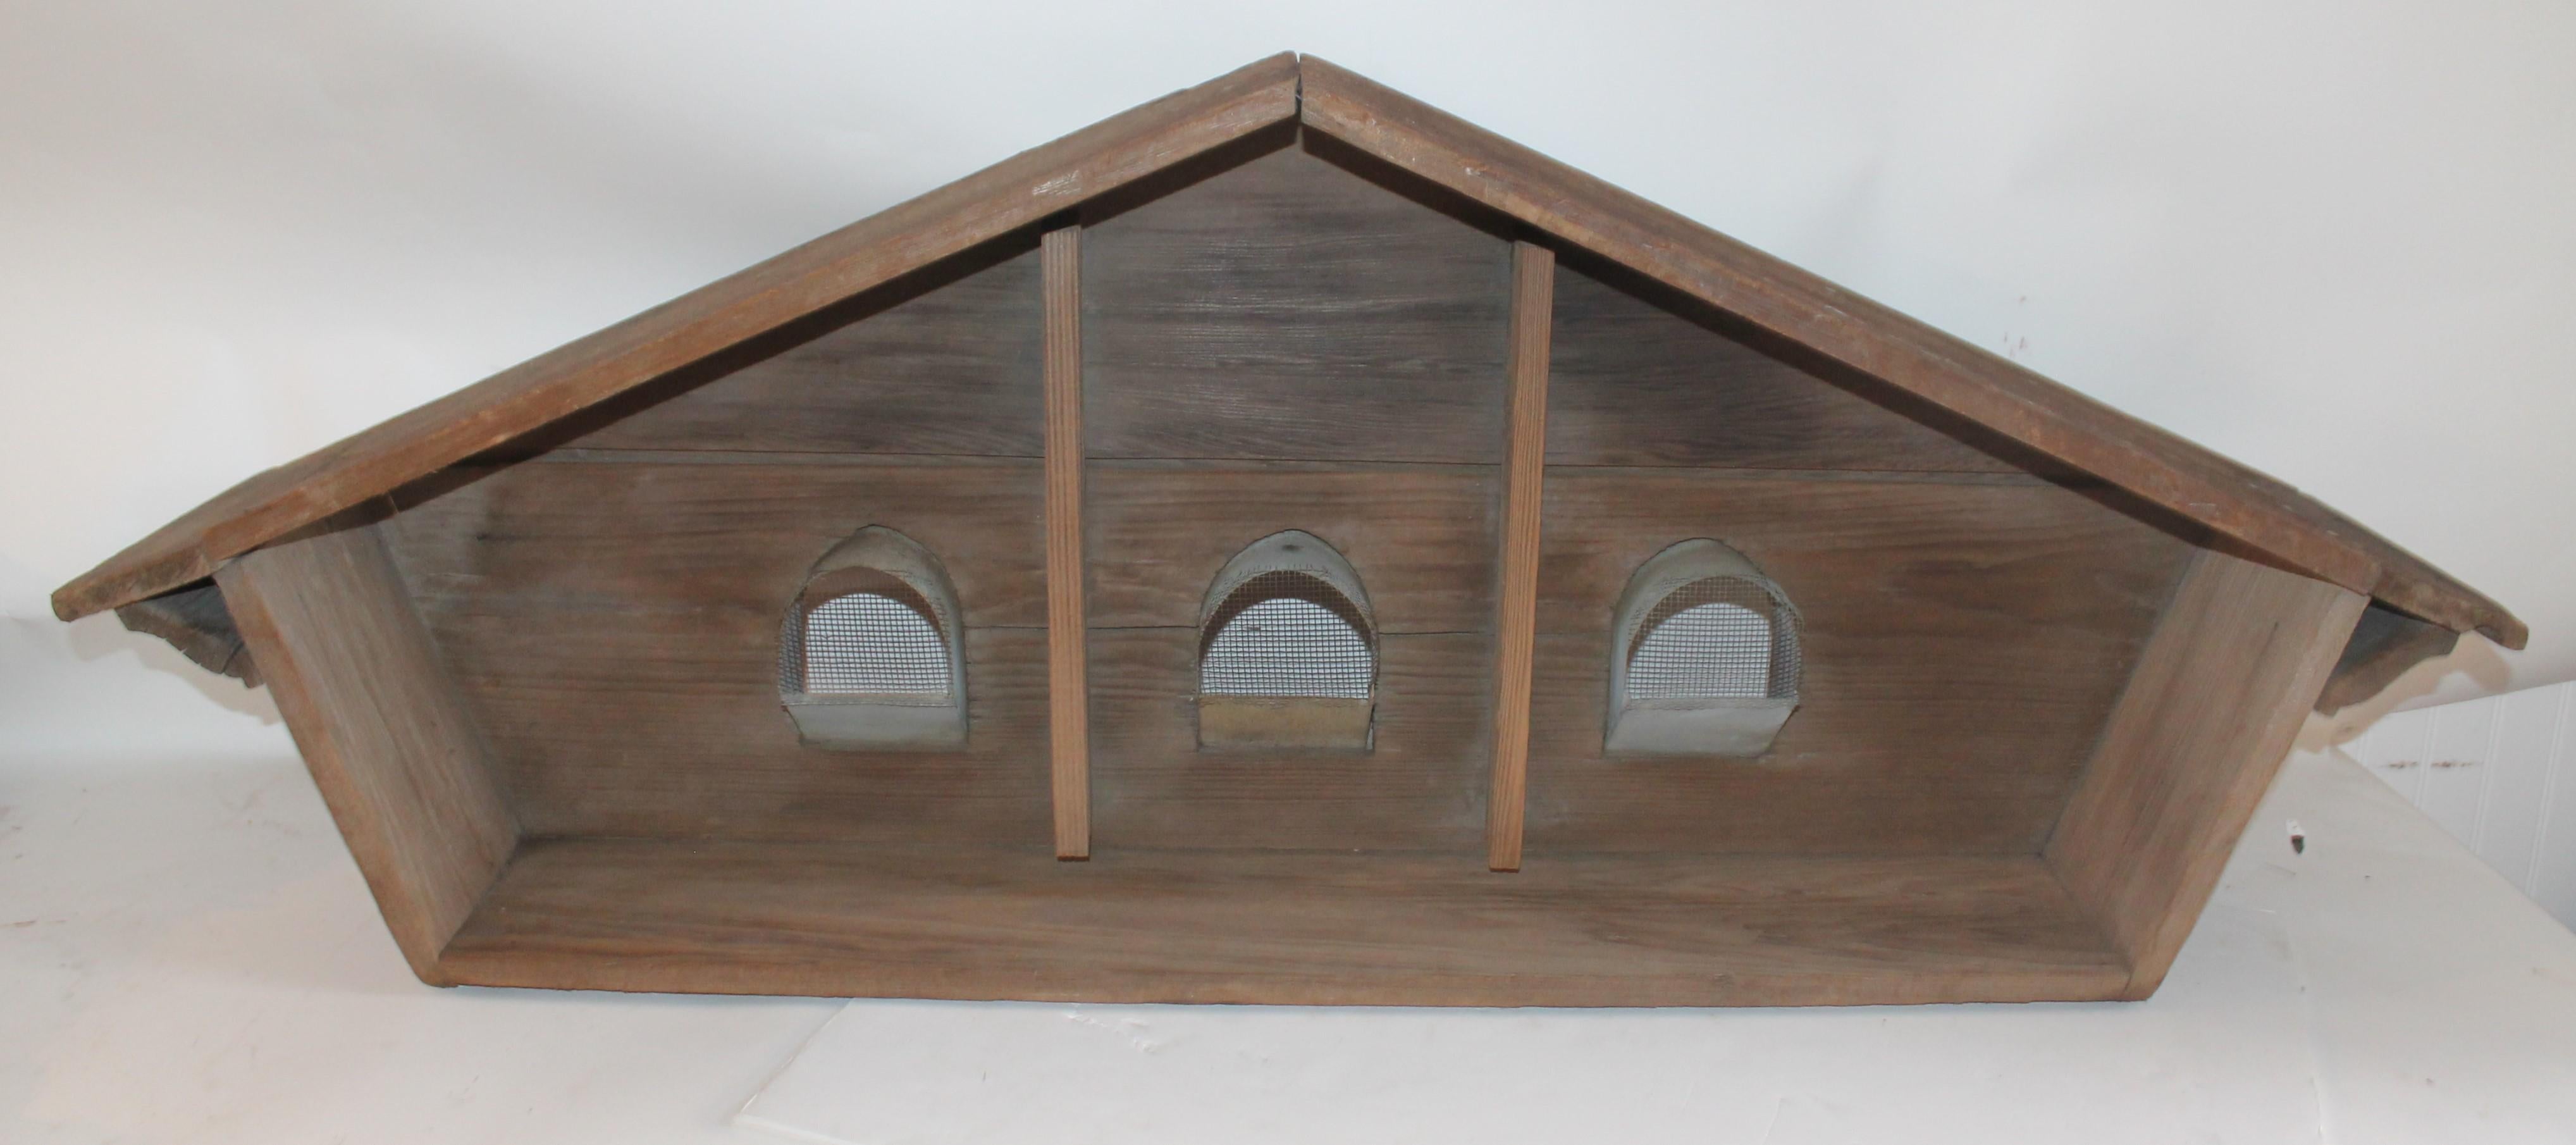 Hand-Crafted Architectural Cupola with Martin Bird House within from a Barn For Sale